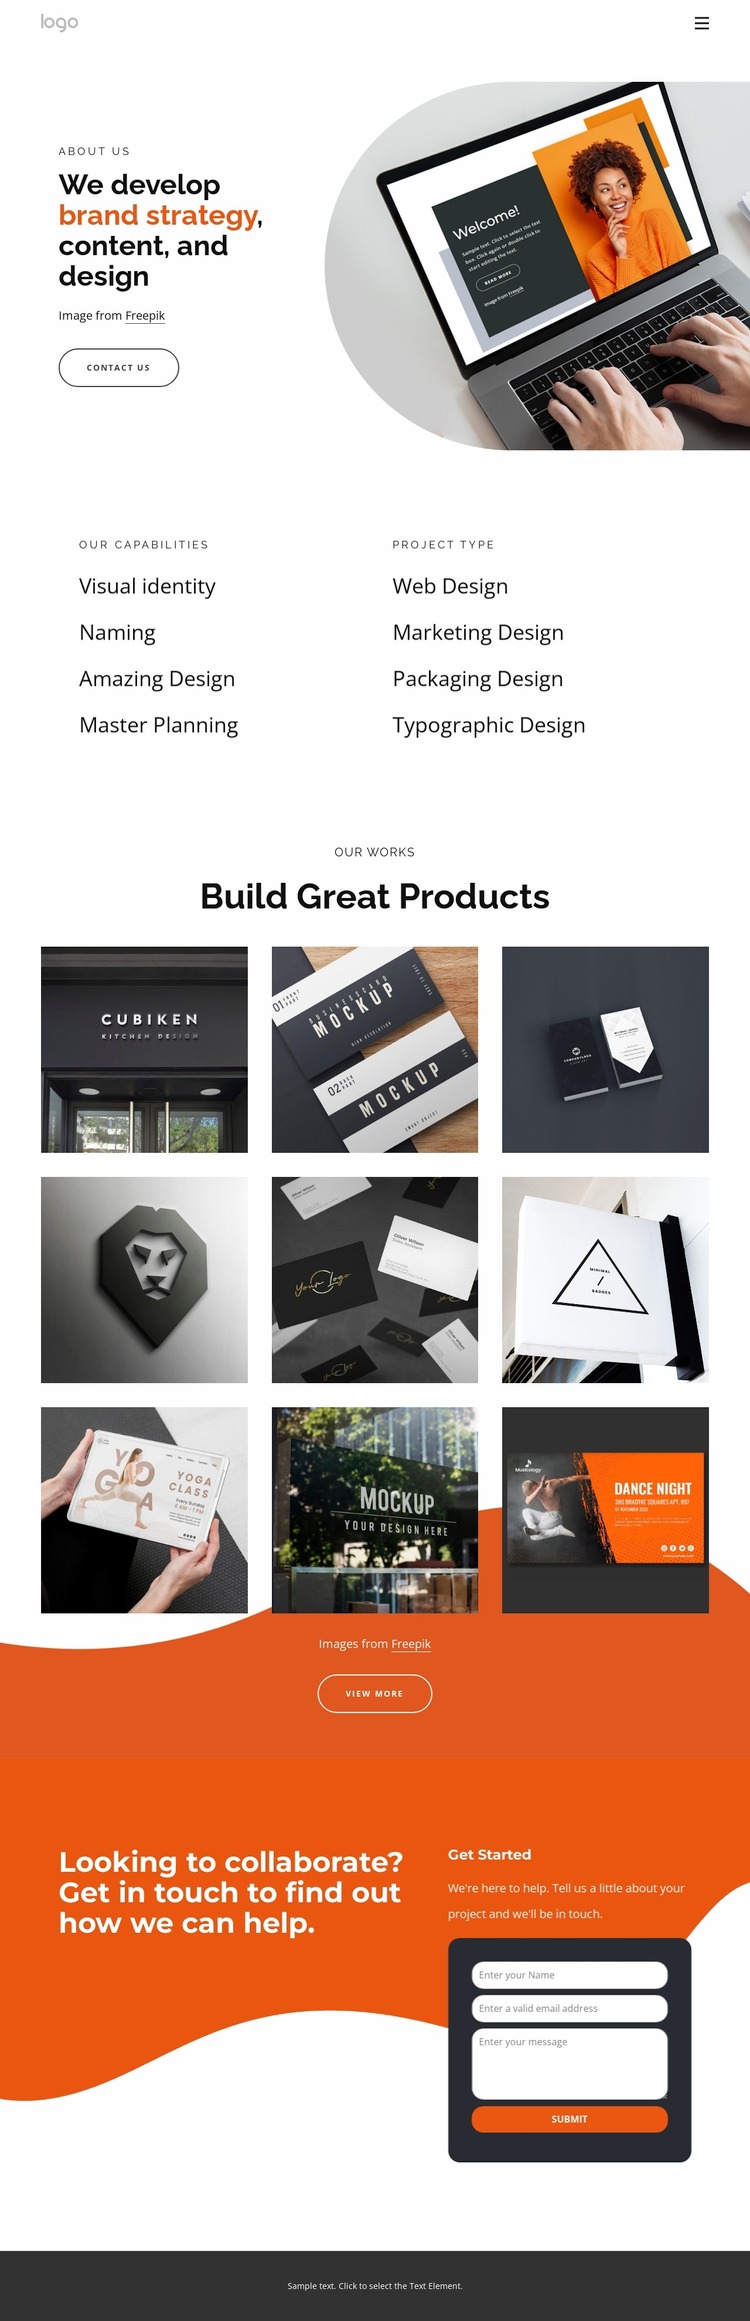 We create thoughtful experiences for humans WordPress Website Builder